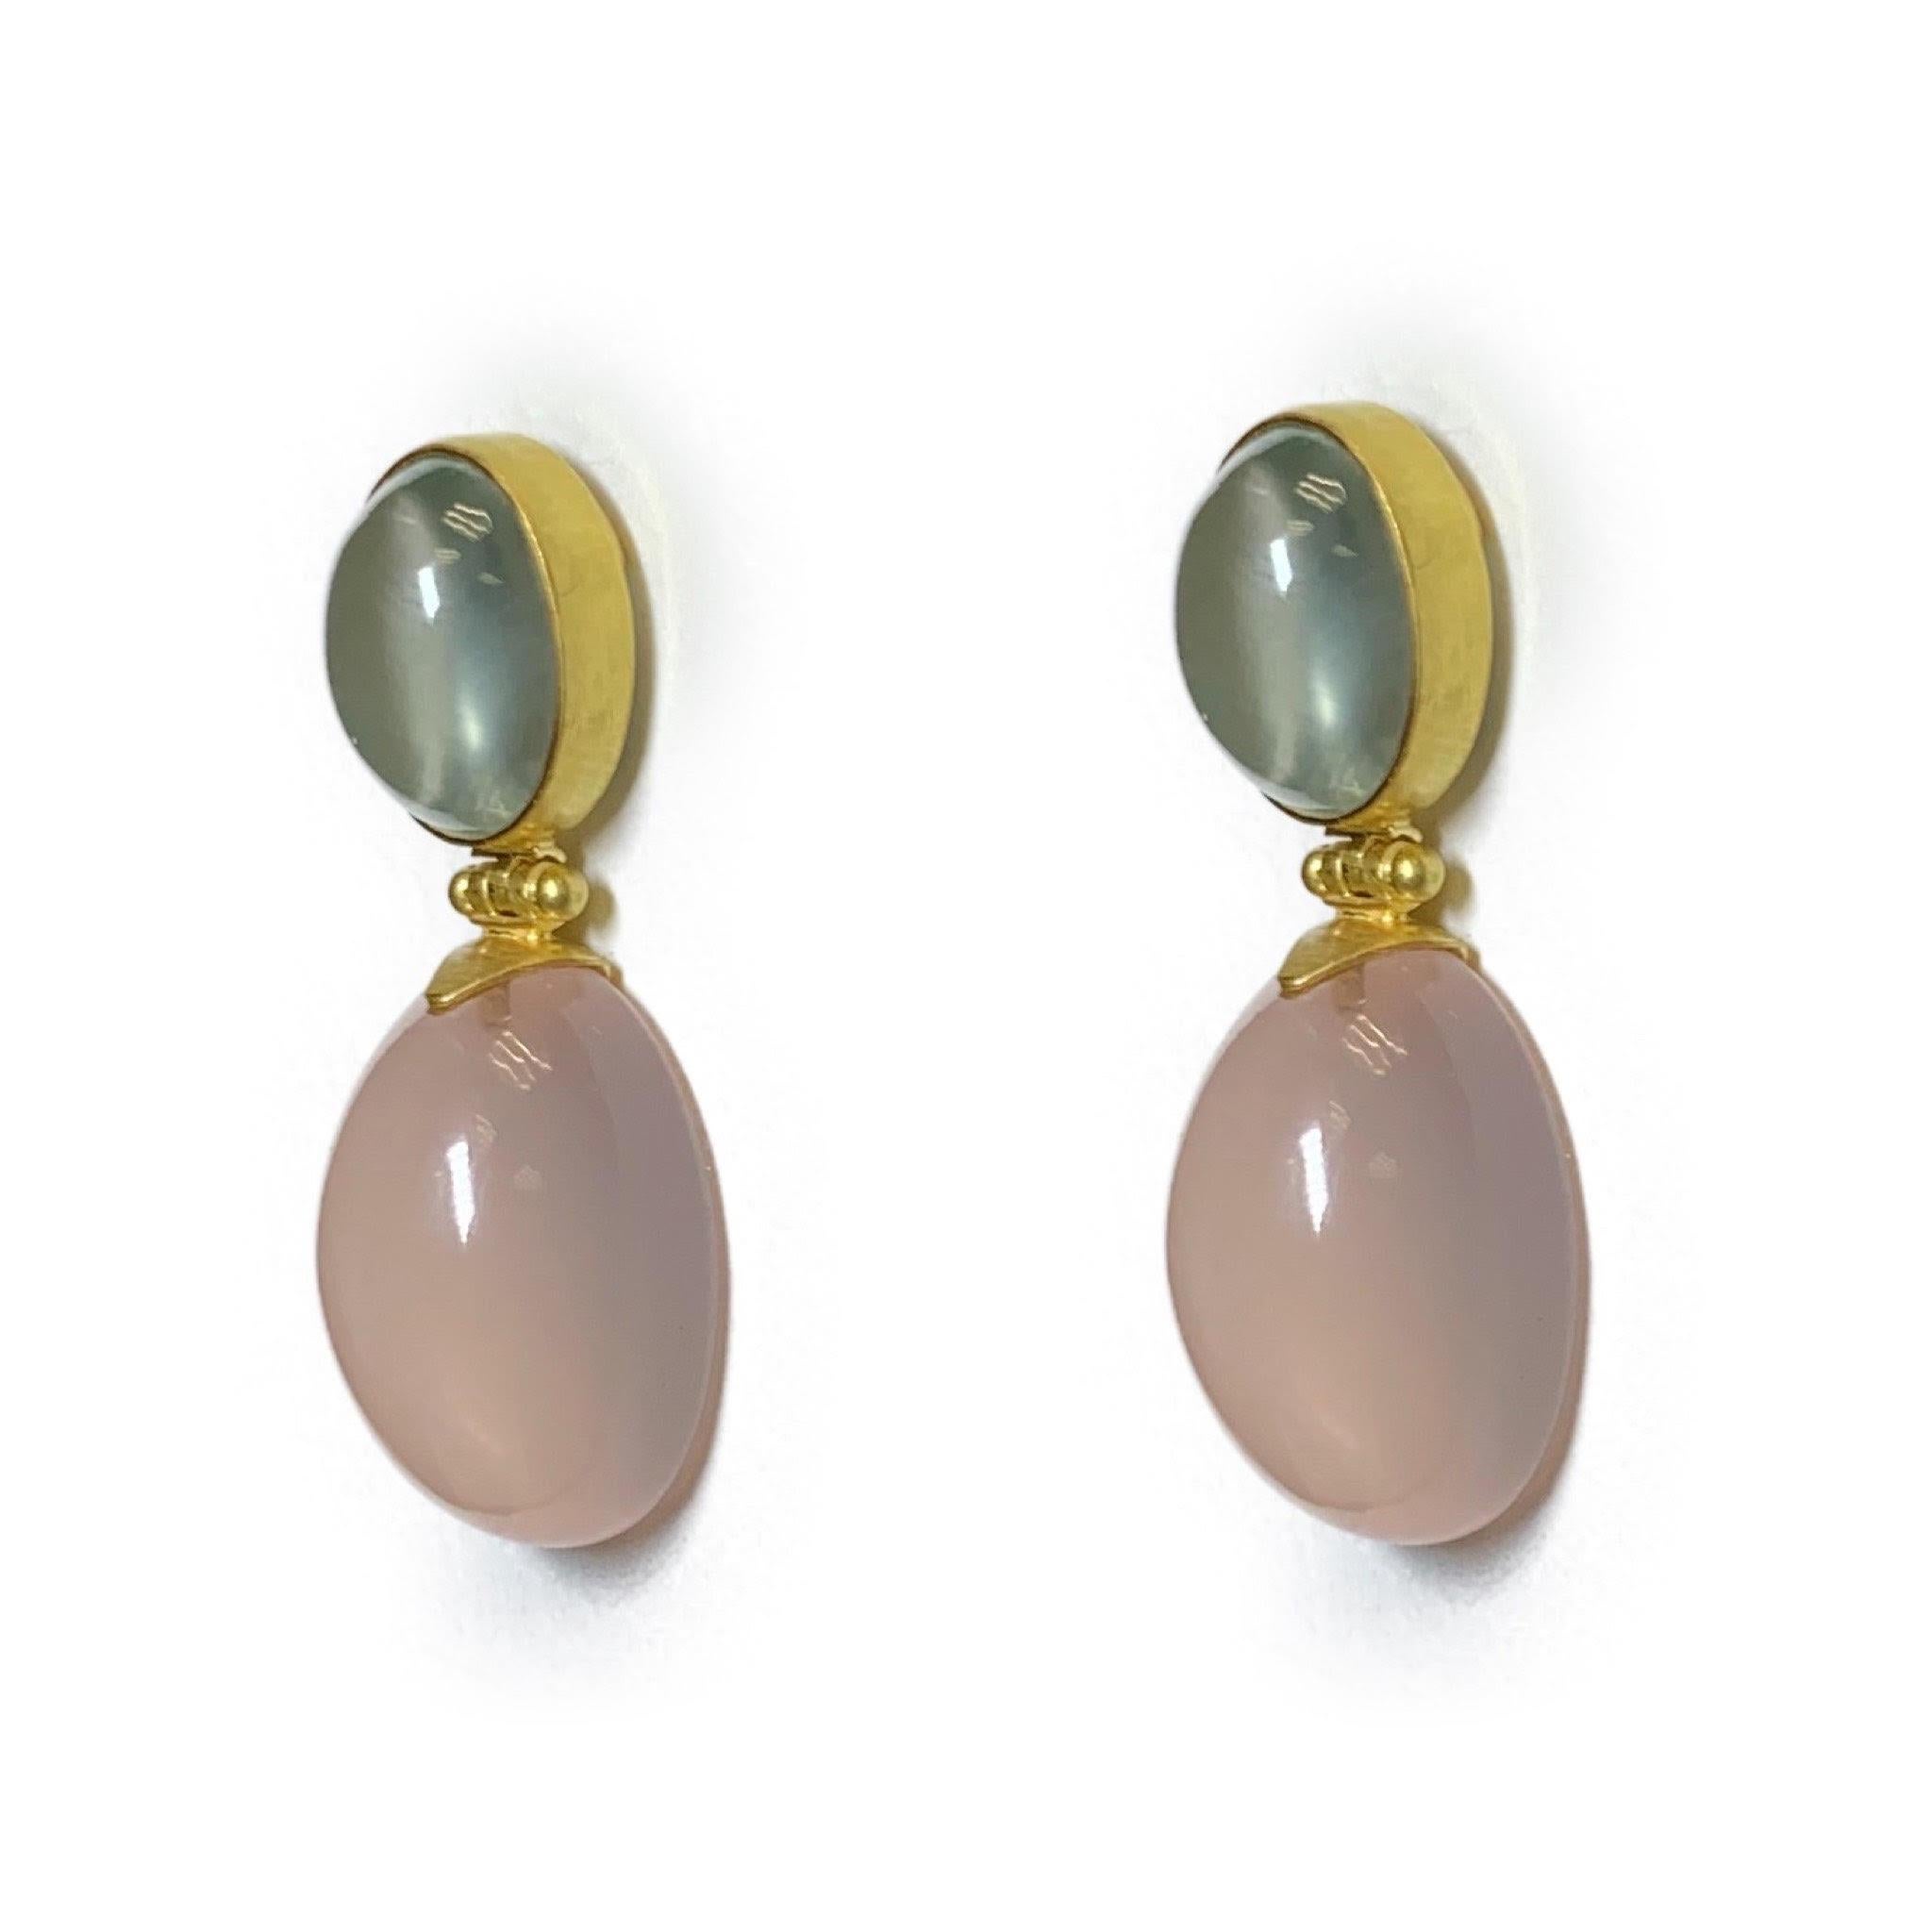 These beautiful two stone earrings are Cabochon cut Prehnite and Rose Quartz. Set in vibrant 18 Karat Yellow Gold with a soft satin finish. 

Prehnite is considered to be the stone of unconditional love and enhances precognition and inner knowing.